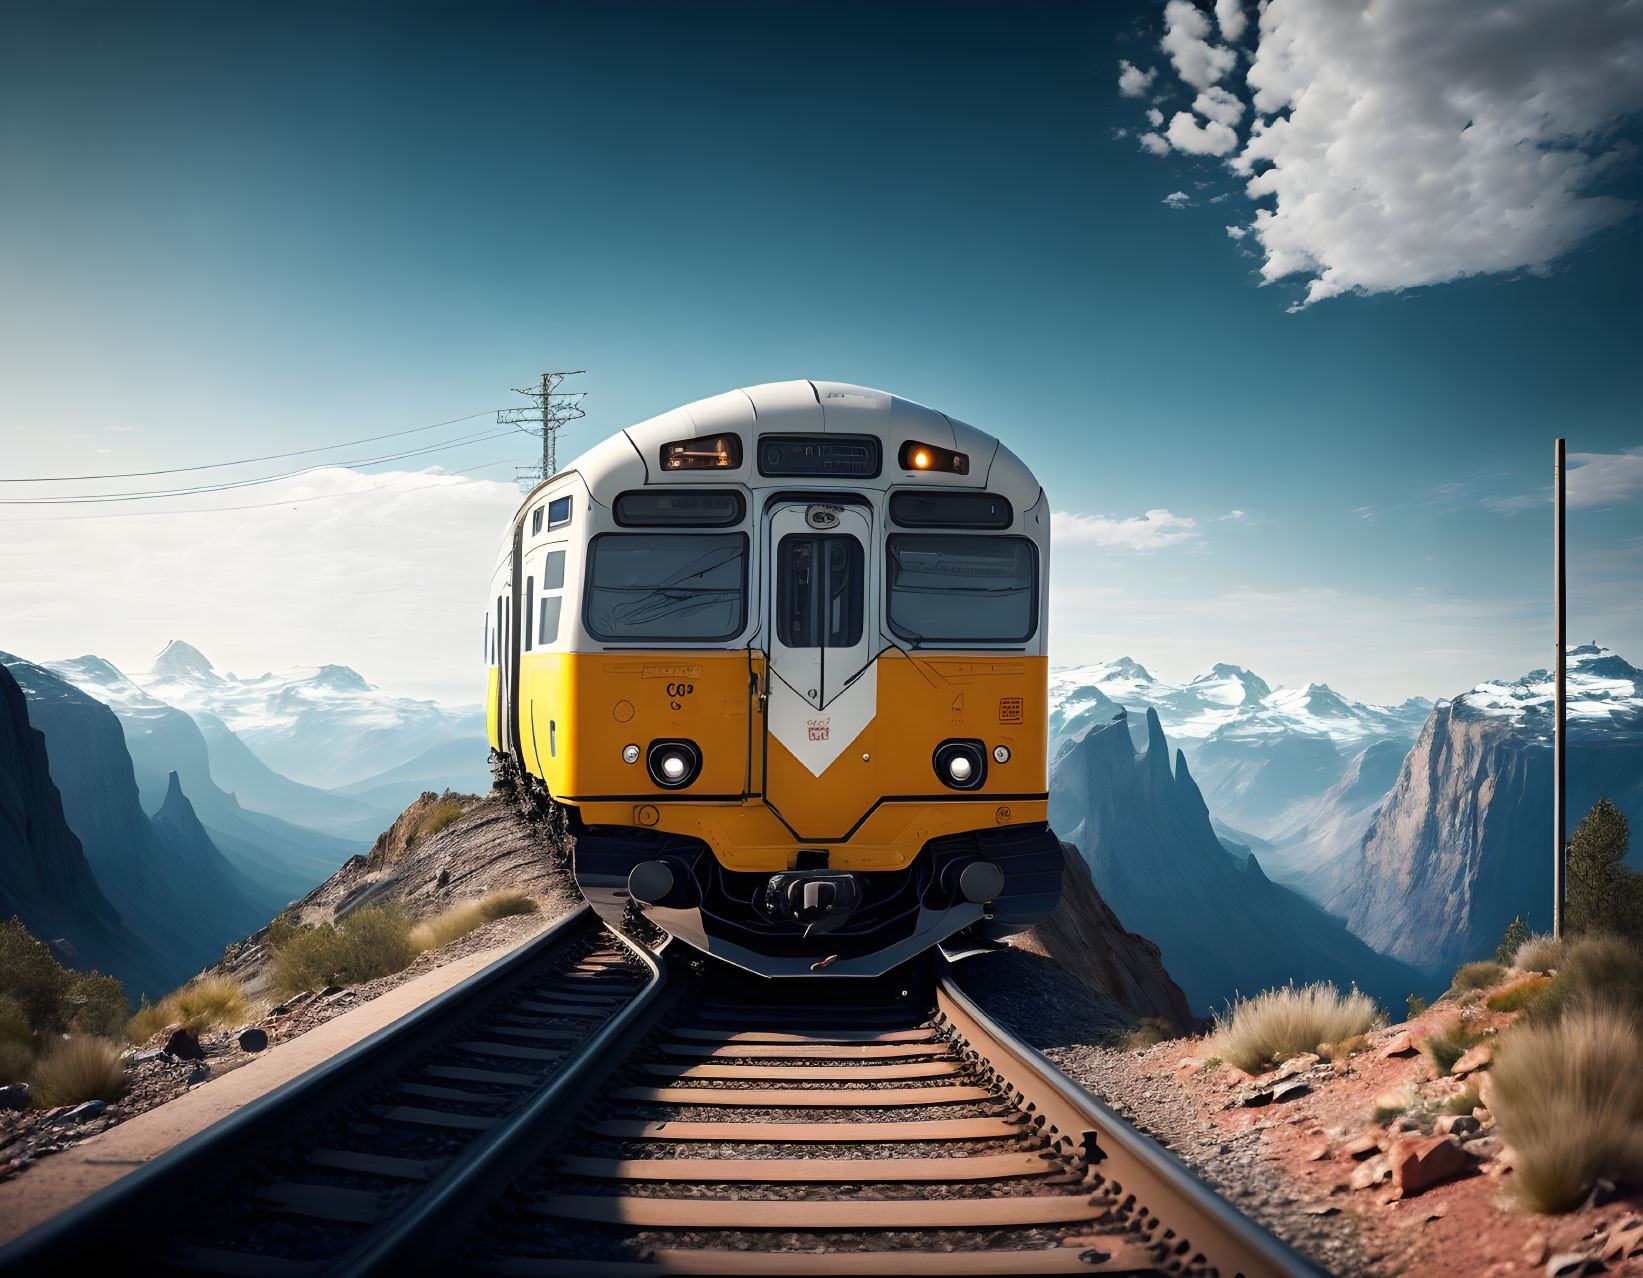 Yellow train on tracks in dramatic mountain landscape.